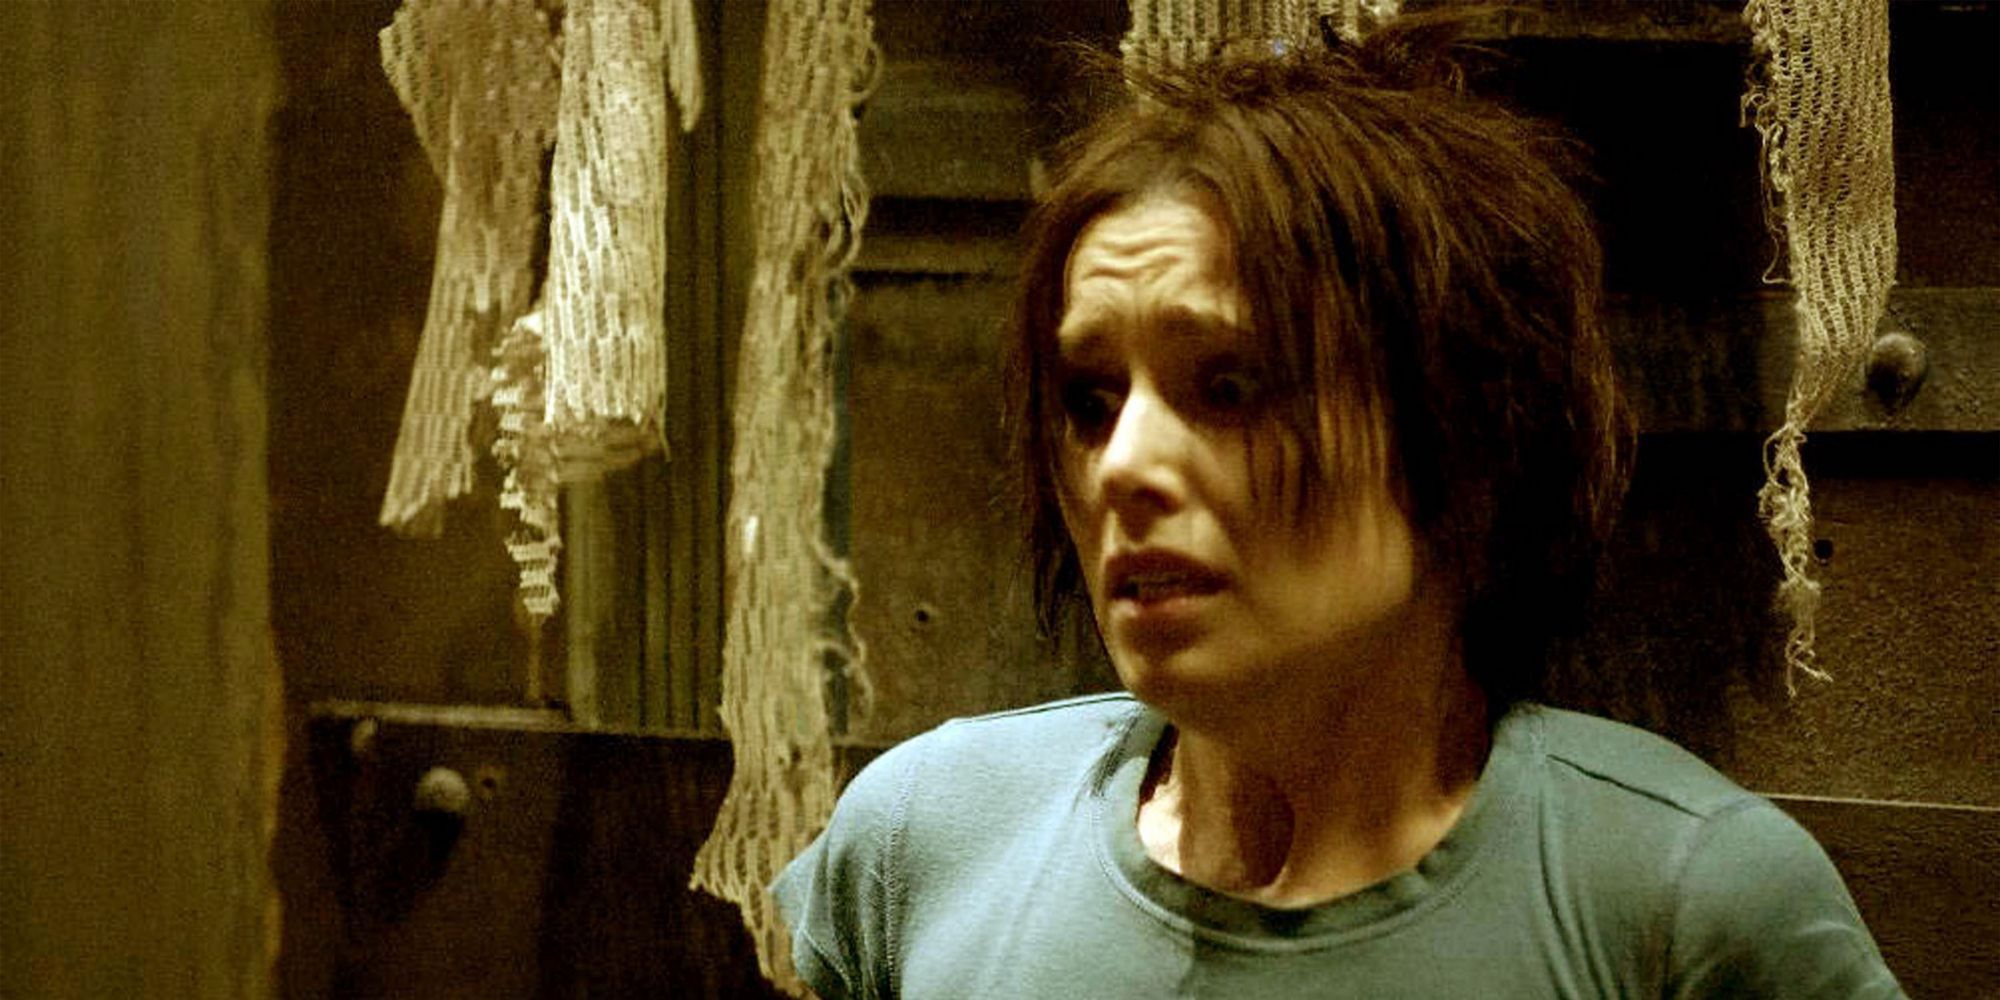 Amanda from Saw II standing by a wall, looking terrified